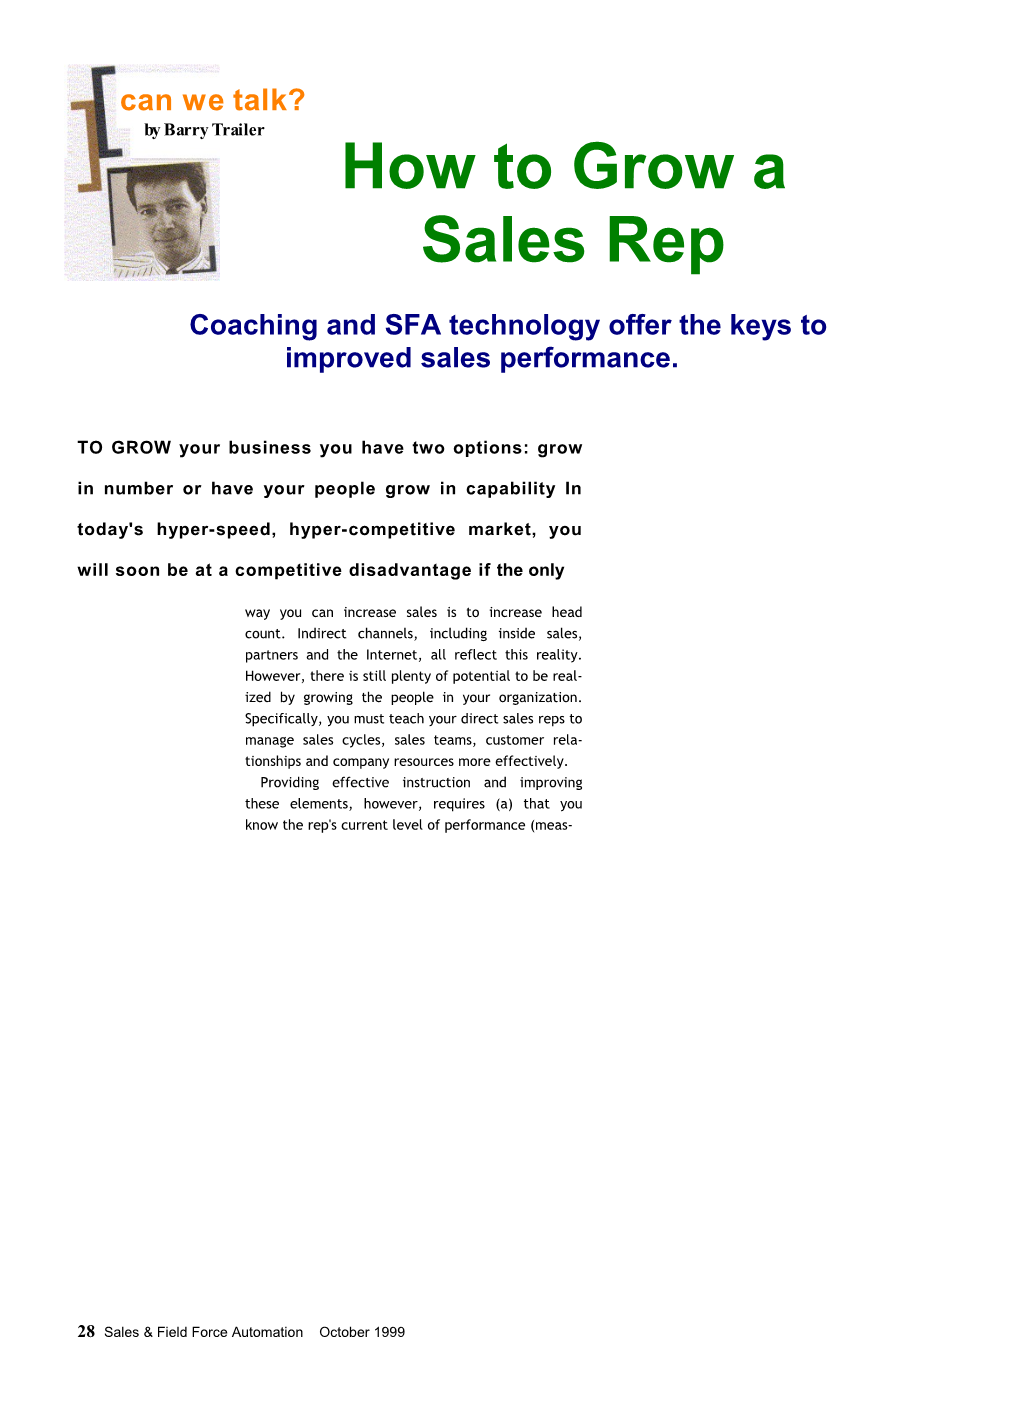 How to Grow a Sales Rep